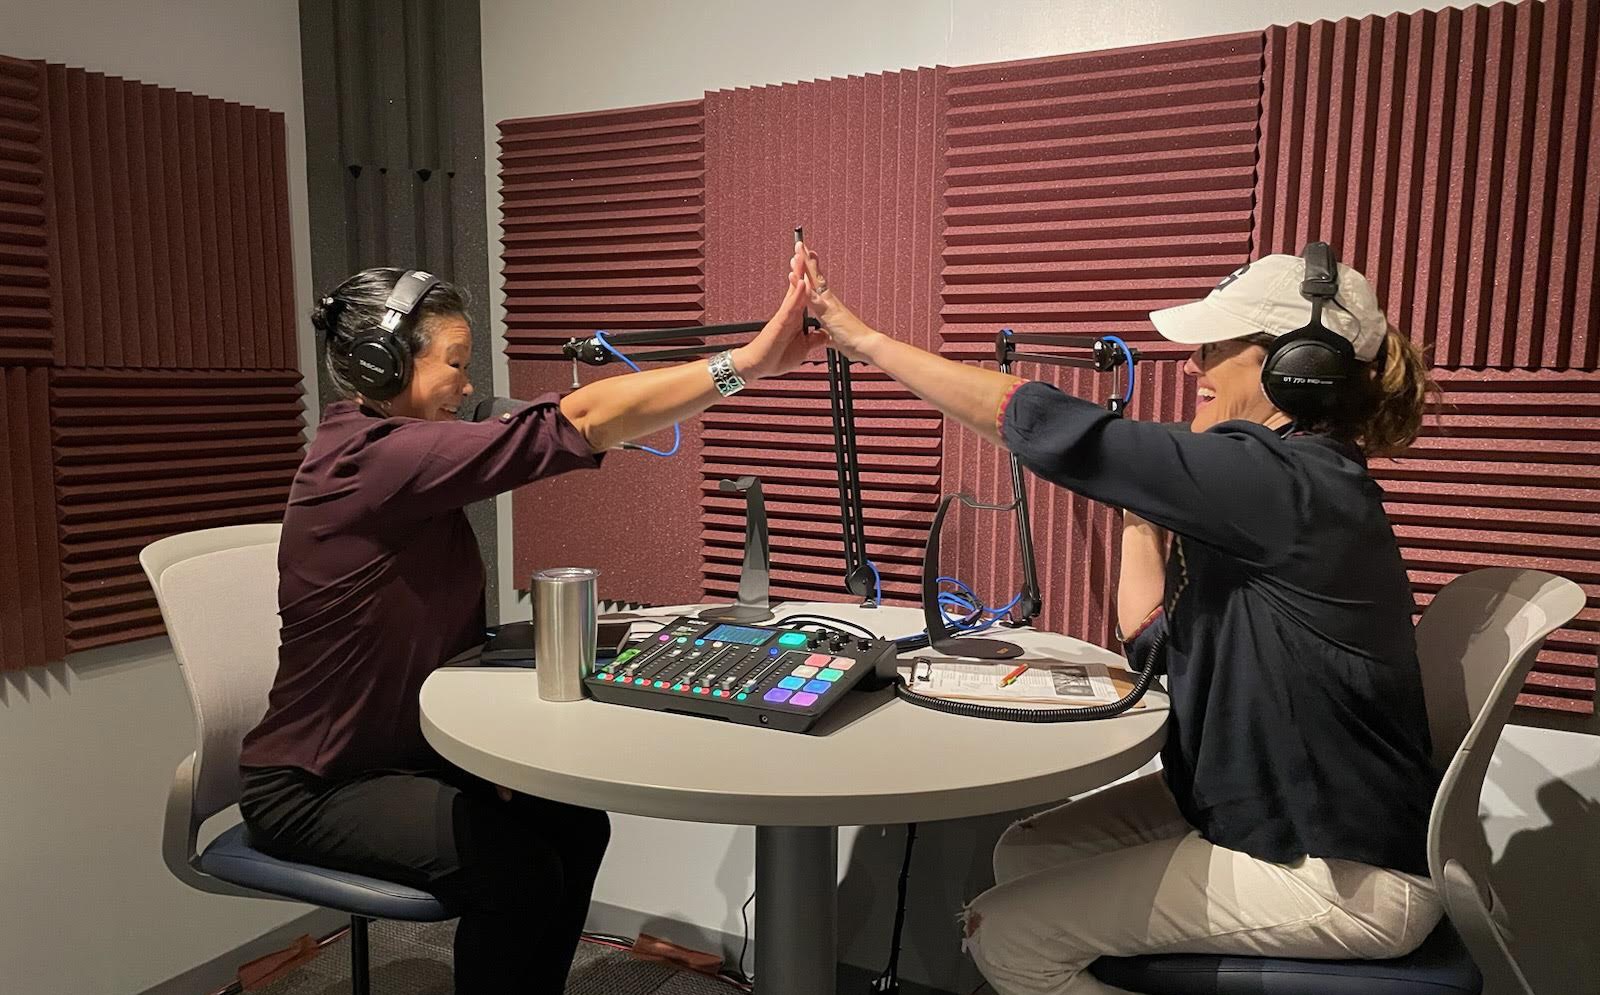 Two women, wearing headphones and speaking into large microphones, are sitting on either side of a round table inside a sound booth and are giving each other a high-five across the table